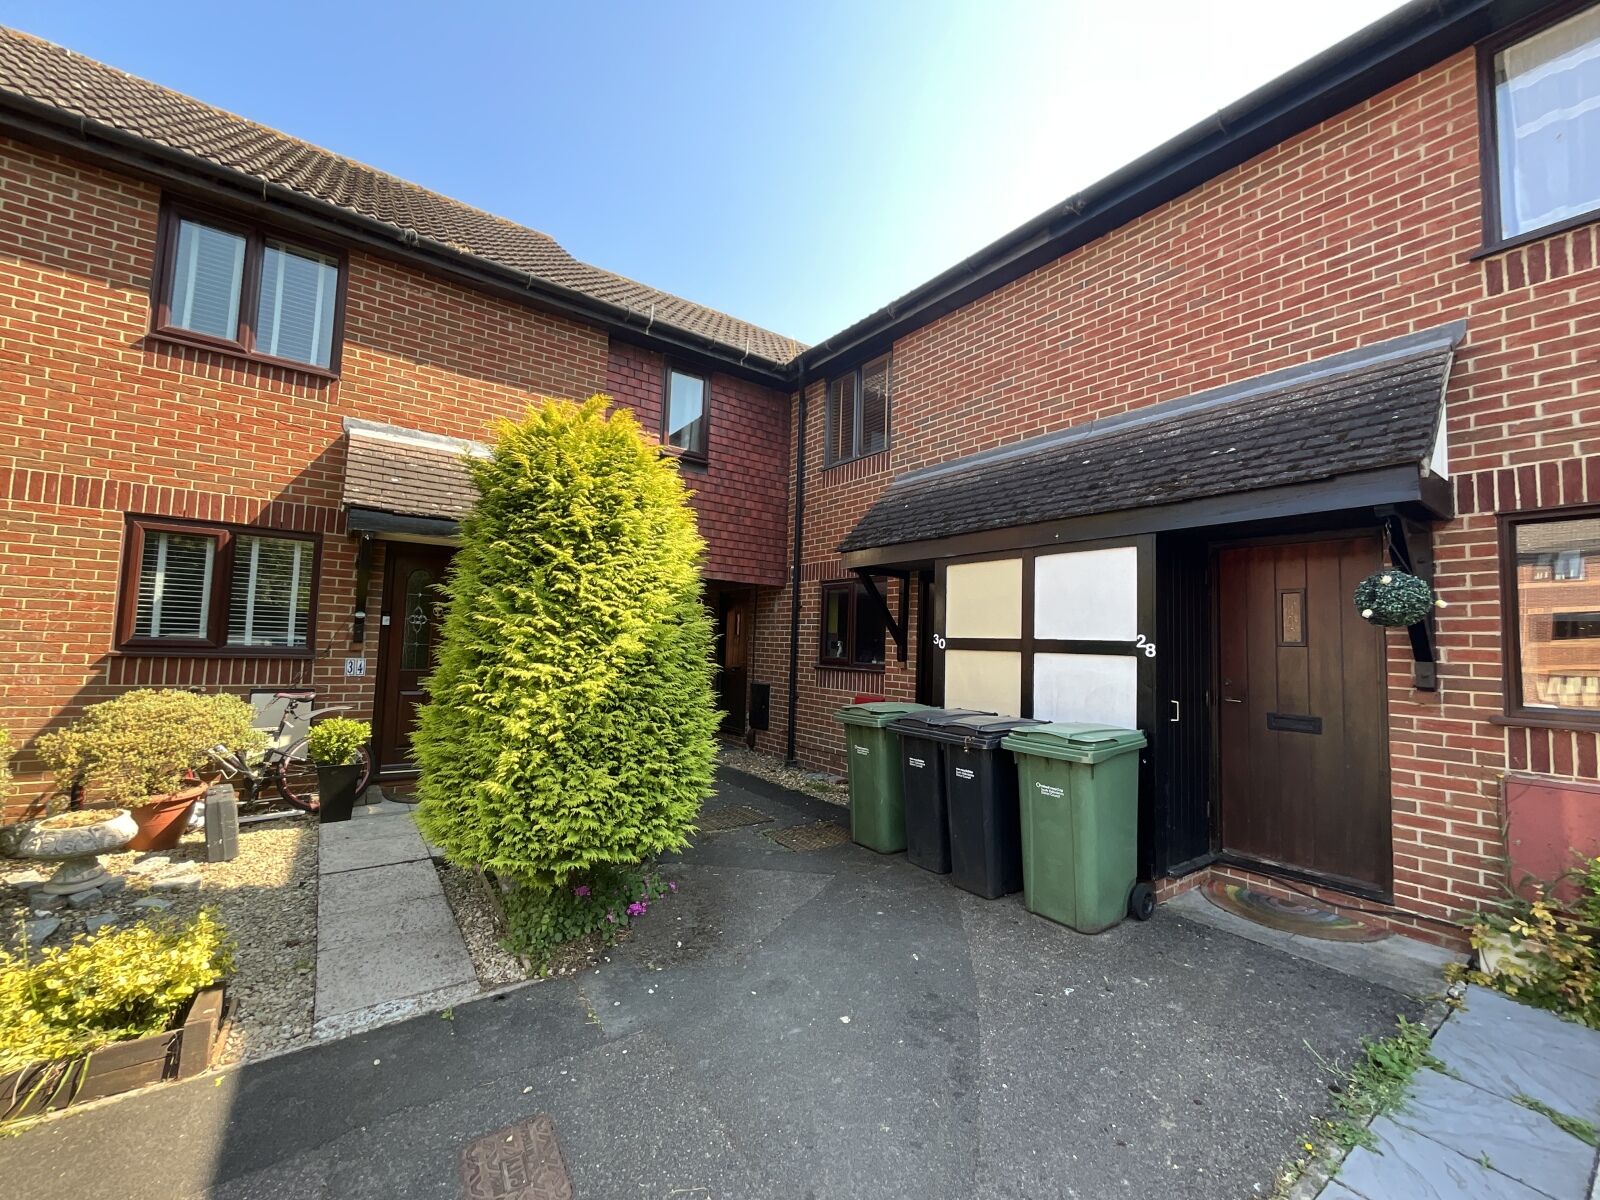 3 bedroom mid terraced house for sale Stonesfield, Didcot, OX11, main image